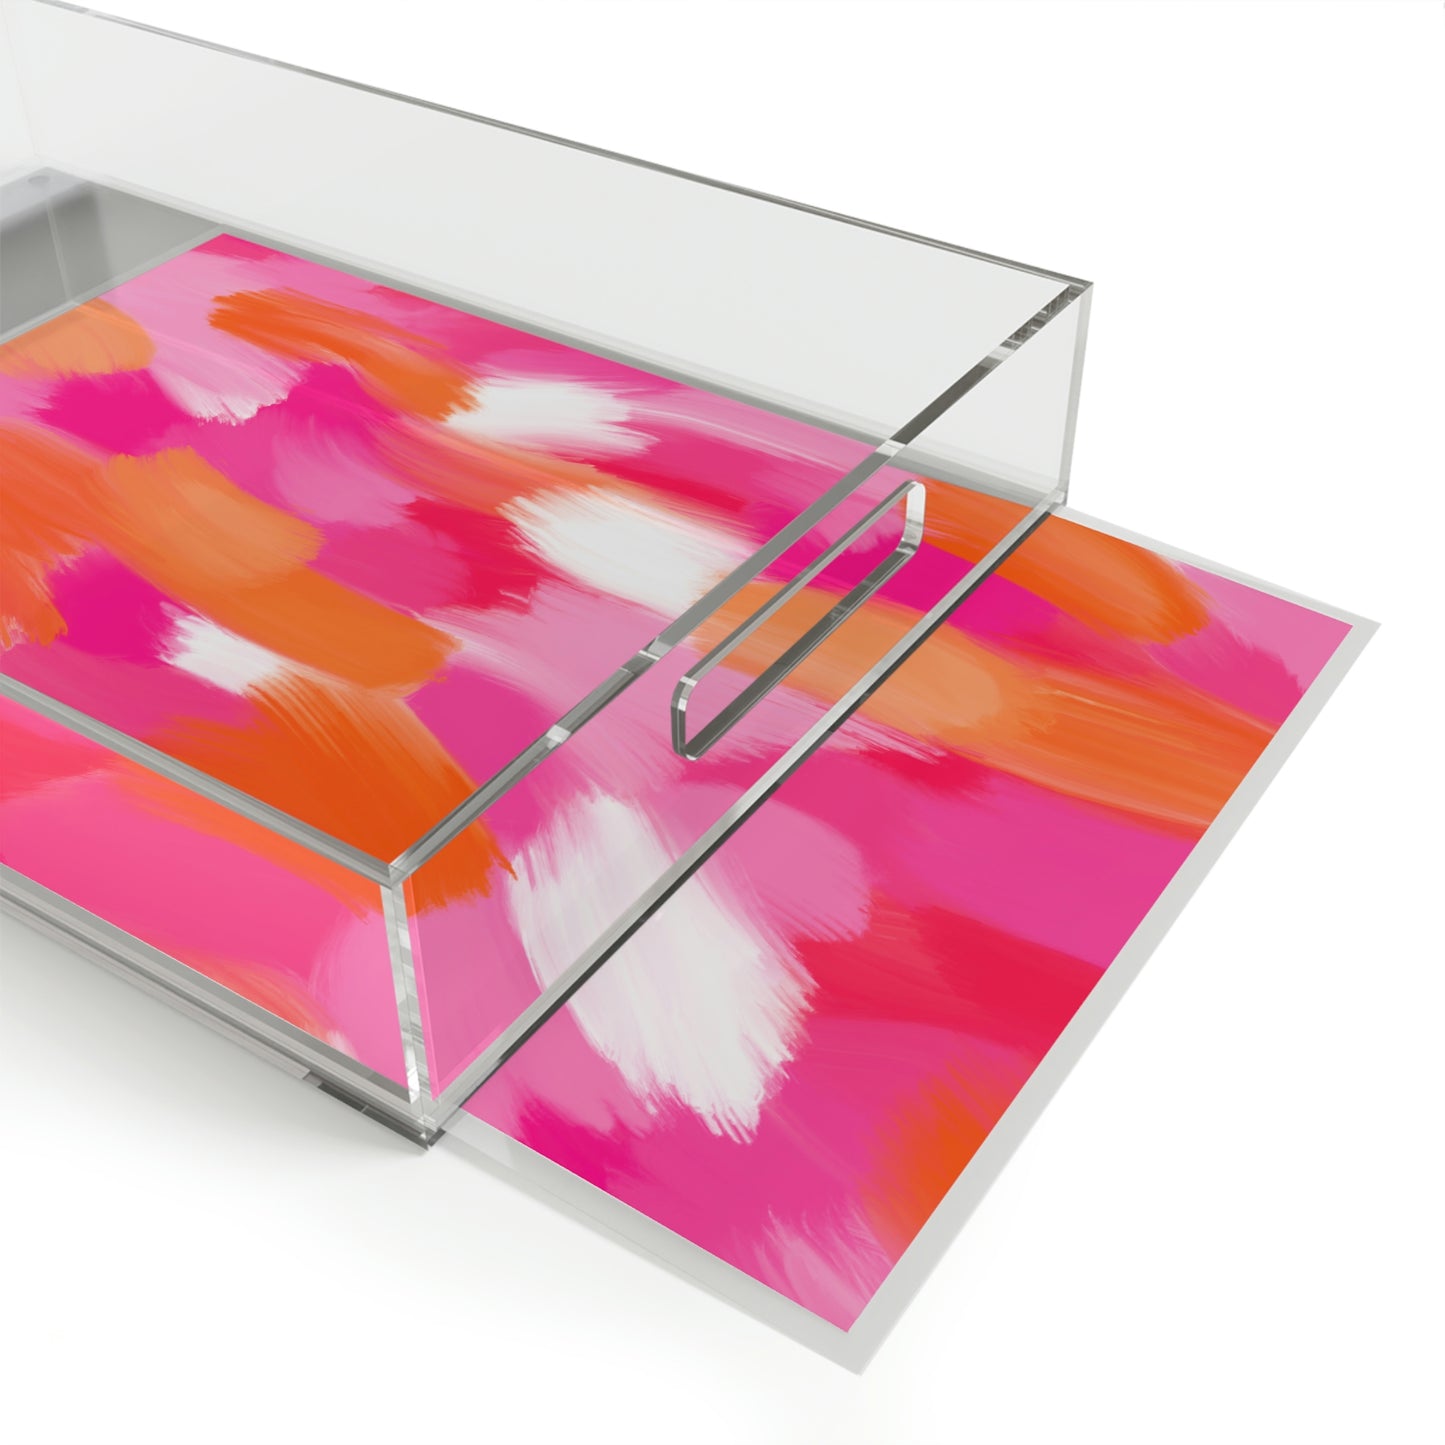 Serving Tray - Pink And Orange - BRYKNOLO LLC Home Decor